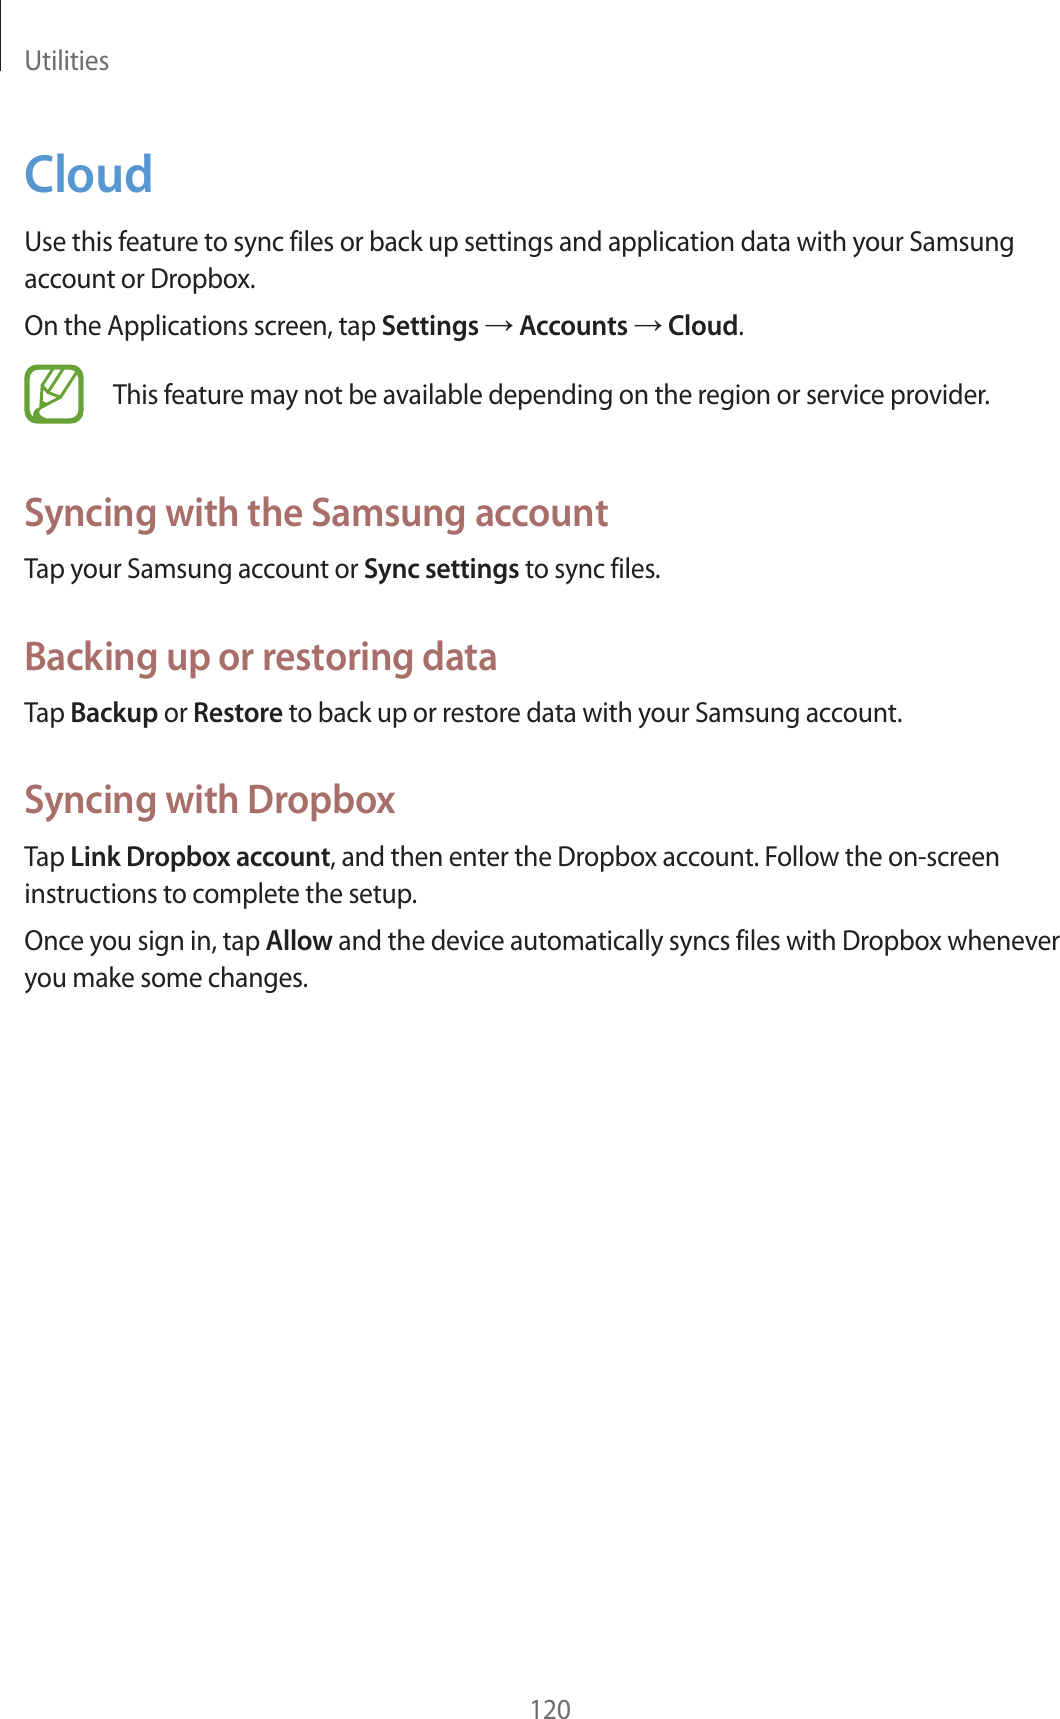 Utilities120CloudUse this feature to sync files or back up settings and application data with your Samsung account or Dropbox.On the Applications screen, tap Settings ĺ Accounts ĺ Cloud.This feature may not be available depending on the region or service provider.Syncing with the Samsung accountTap your Samsung account or Sync settings to sync files.Backing up or restoring dataTap Backup or Restore to back up or restore data with your Samsung account.Syncing with DropboxTap Link Dropbox account, and then enter the Dropbox account. Follow the on-screen instructions to complete the setup.Once you sign in, tap Allow and the device automatically syncs files with Dropbox whenever you make some changes.